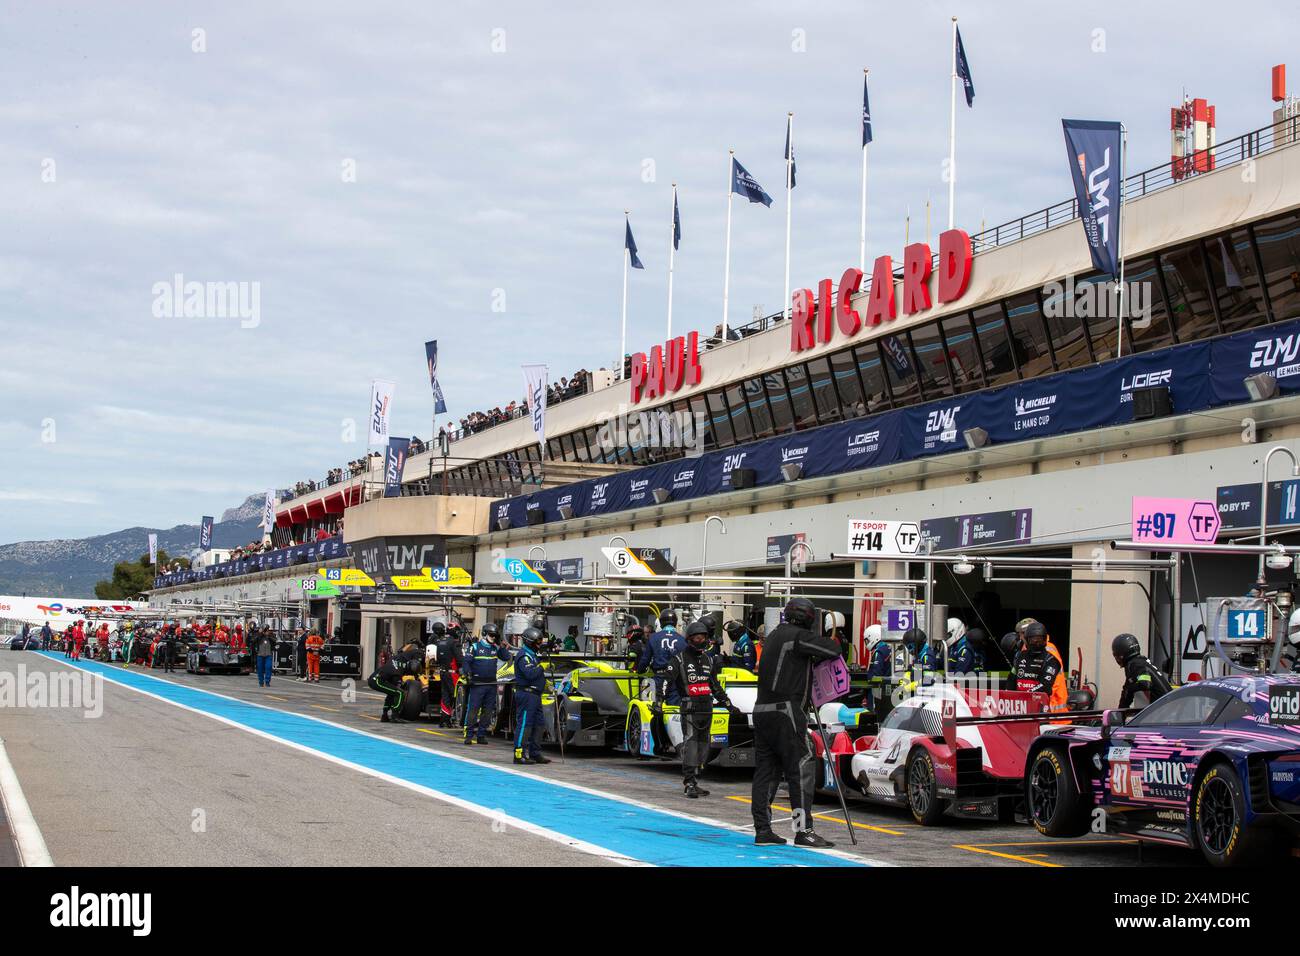 Le Castellet, France, 4 May 2024, pitlane at the start of free practice 2 during the 4 Hours of Le Castellet, second race of the 2024 European Le Mans Series (ELMS) at Circuit Paul Ricard from May 02 to 05, 2024 in Le Castellet, France - Photo Laurent Cartalade/MPS Agency Credit MPS Agency/Alamy Live News Stock Photo